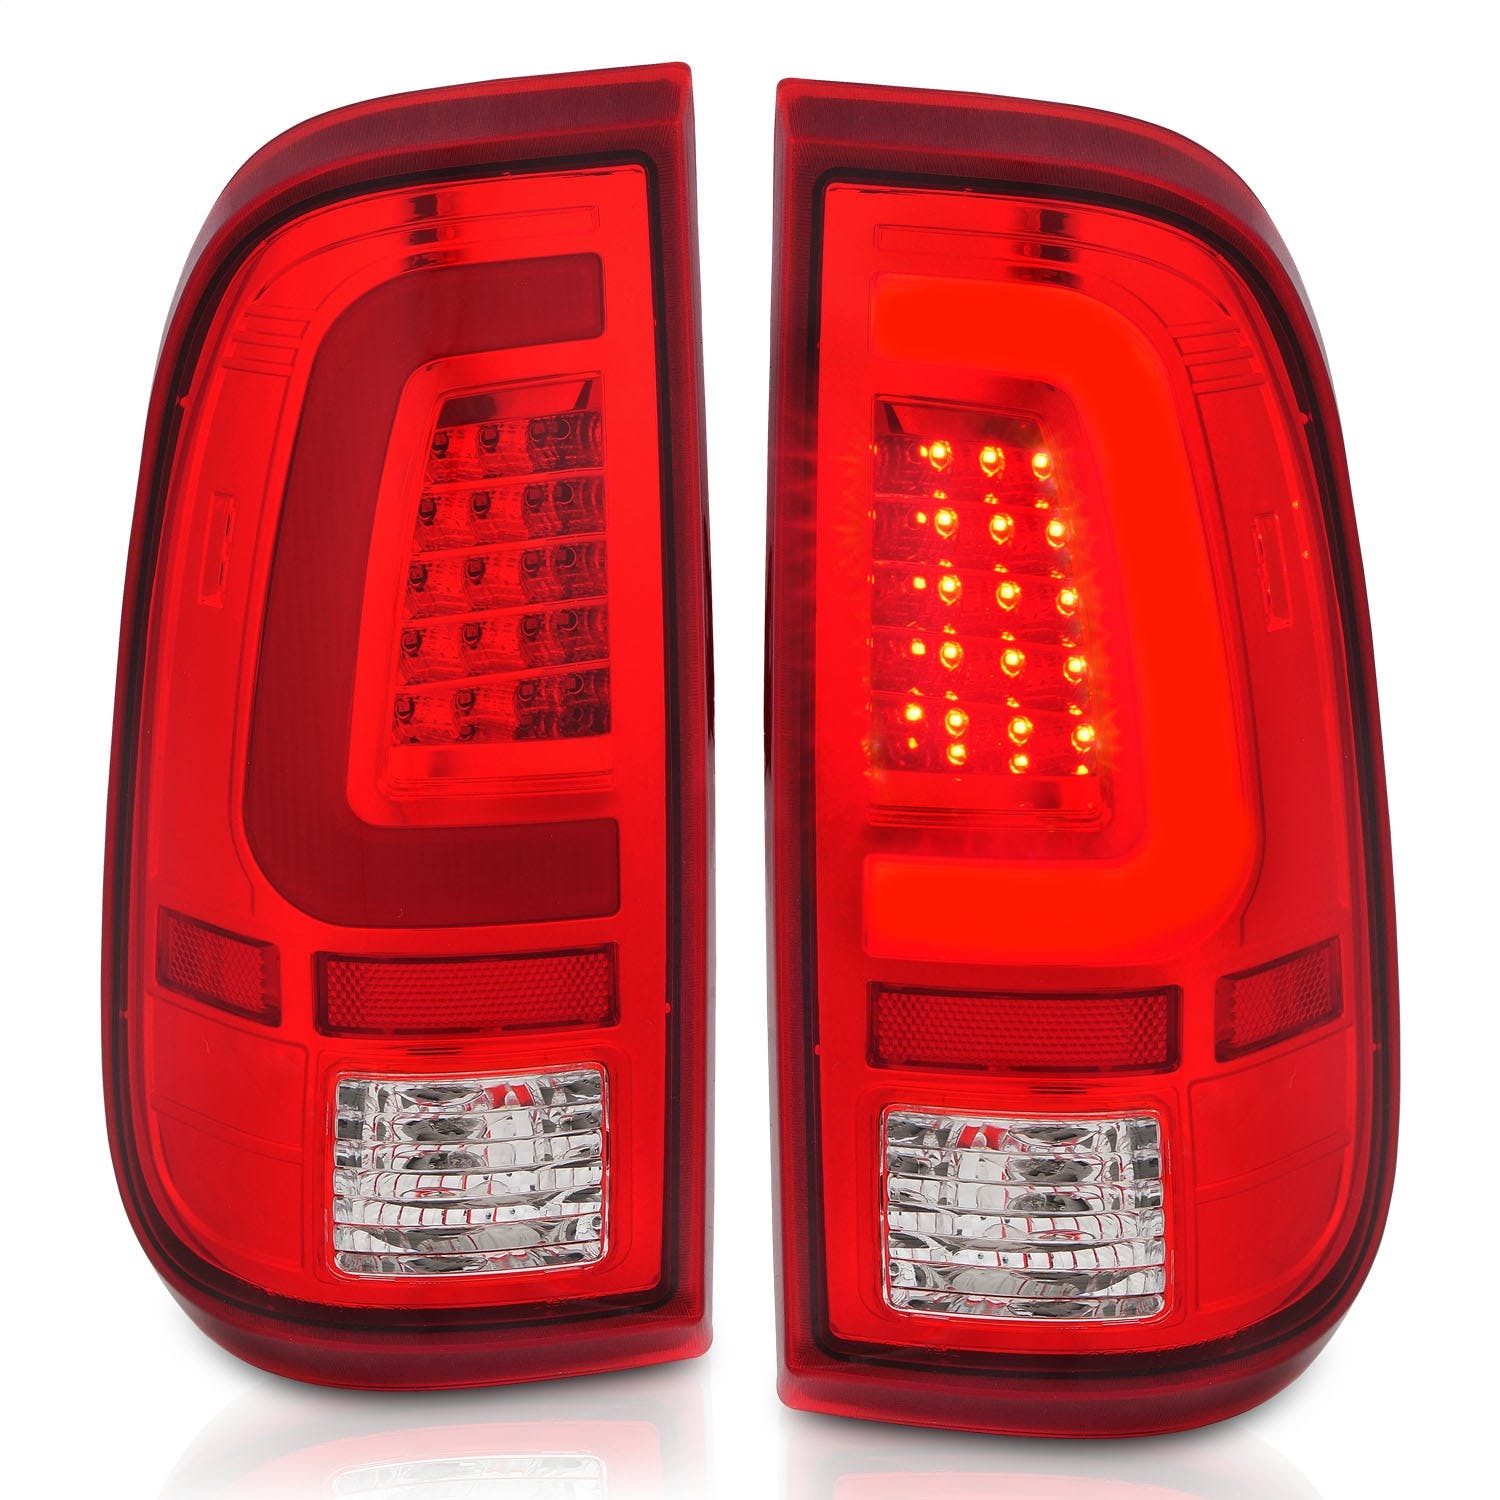 AnzoUSA 311358 LED Taillights Chrome Housing Red/Clear Lens